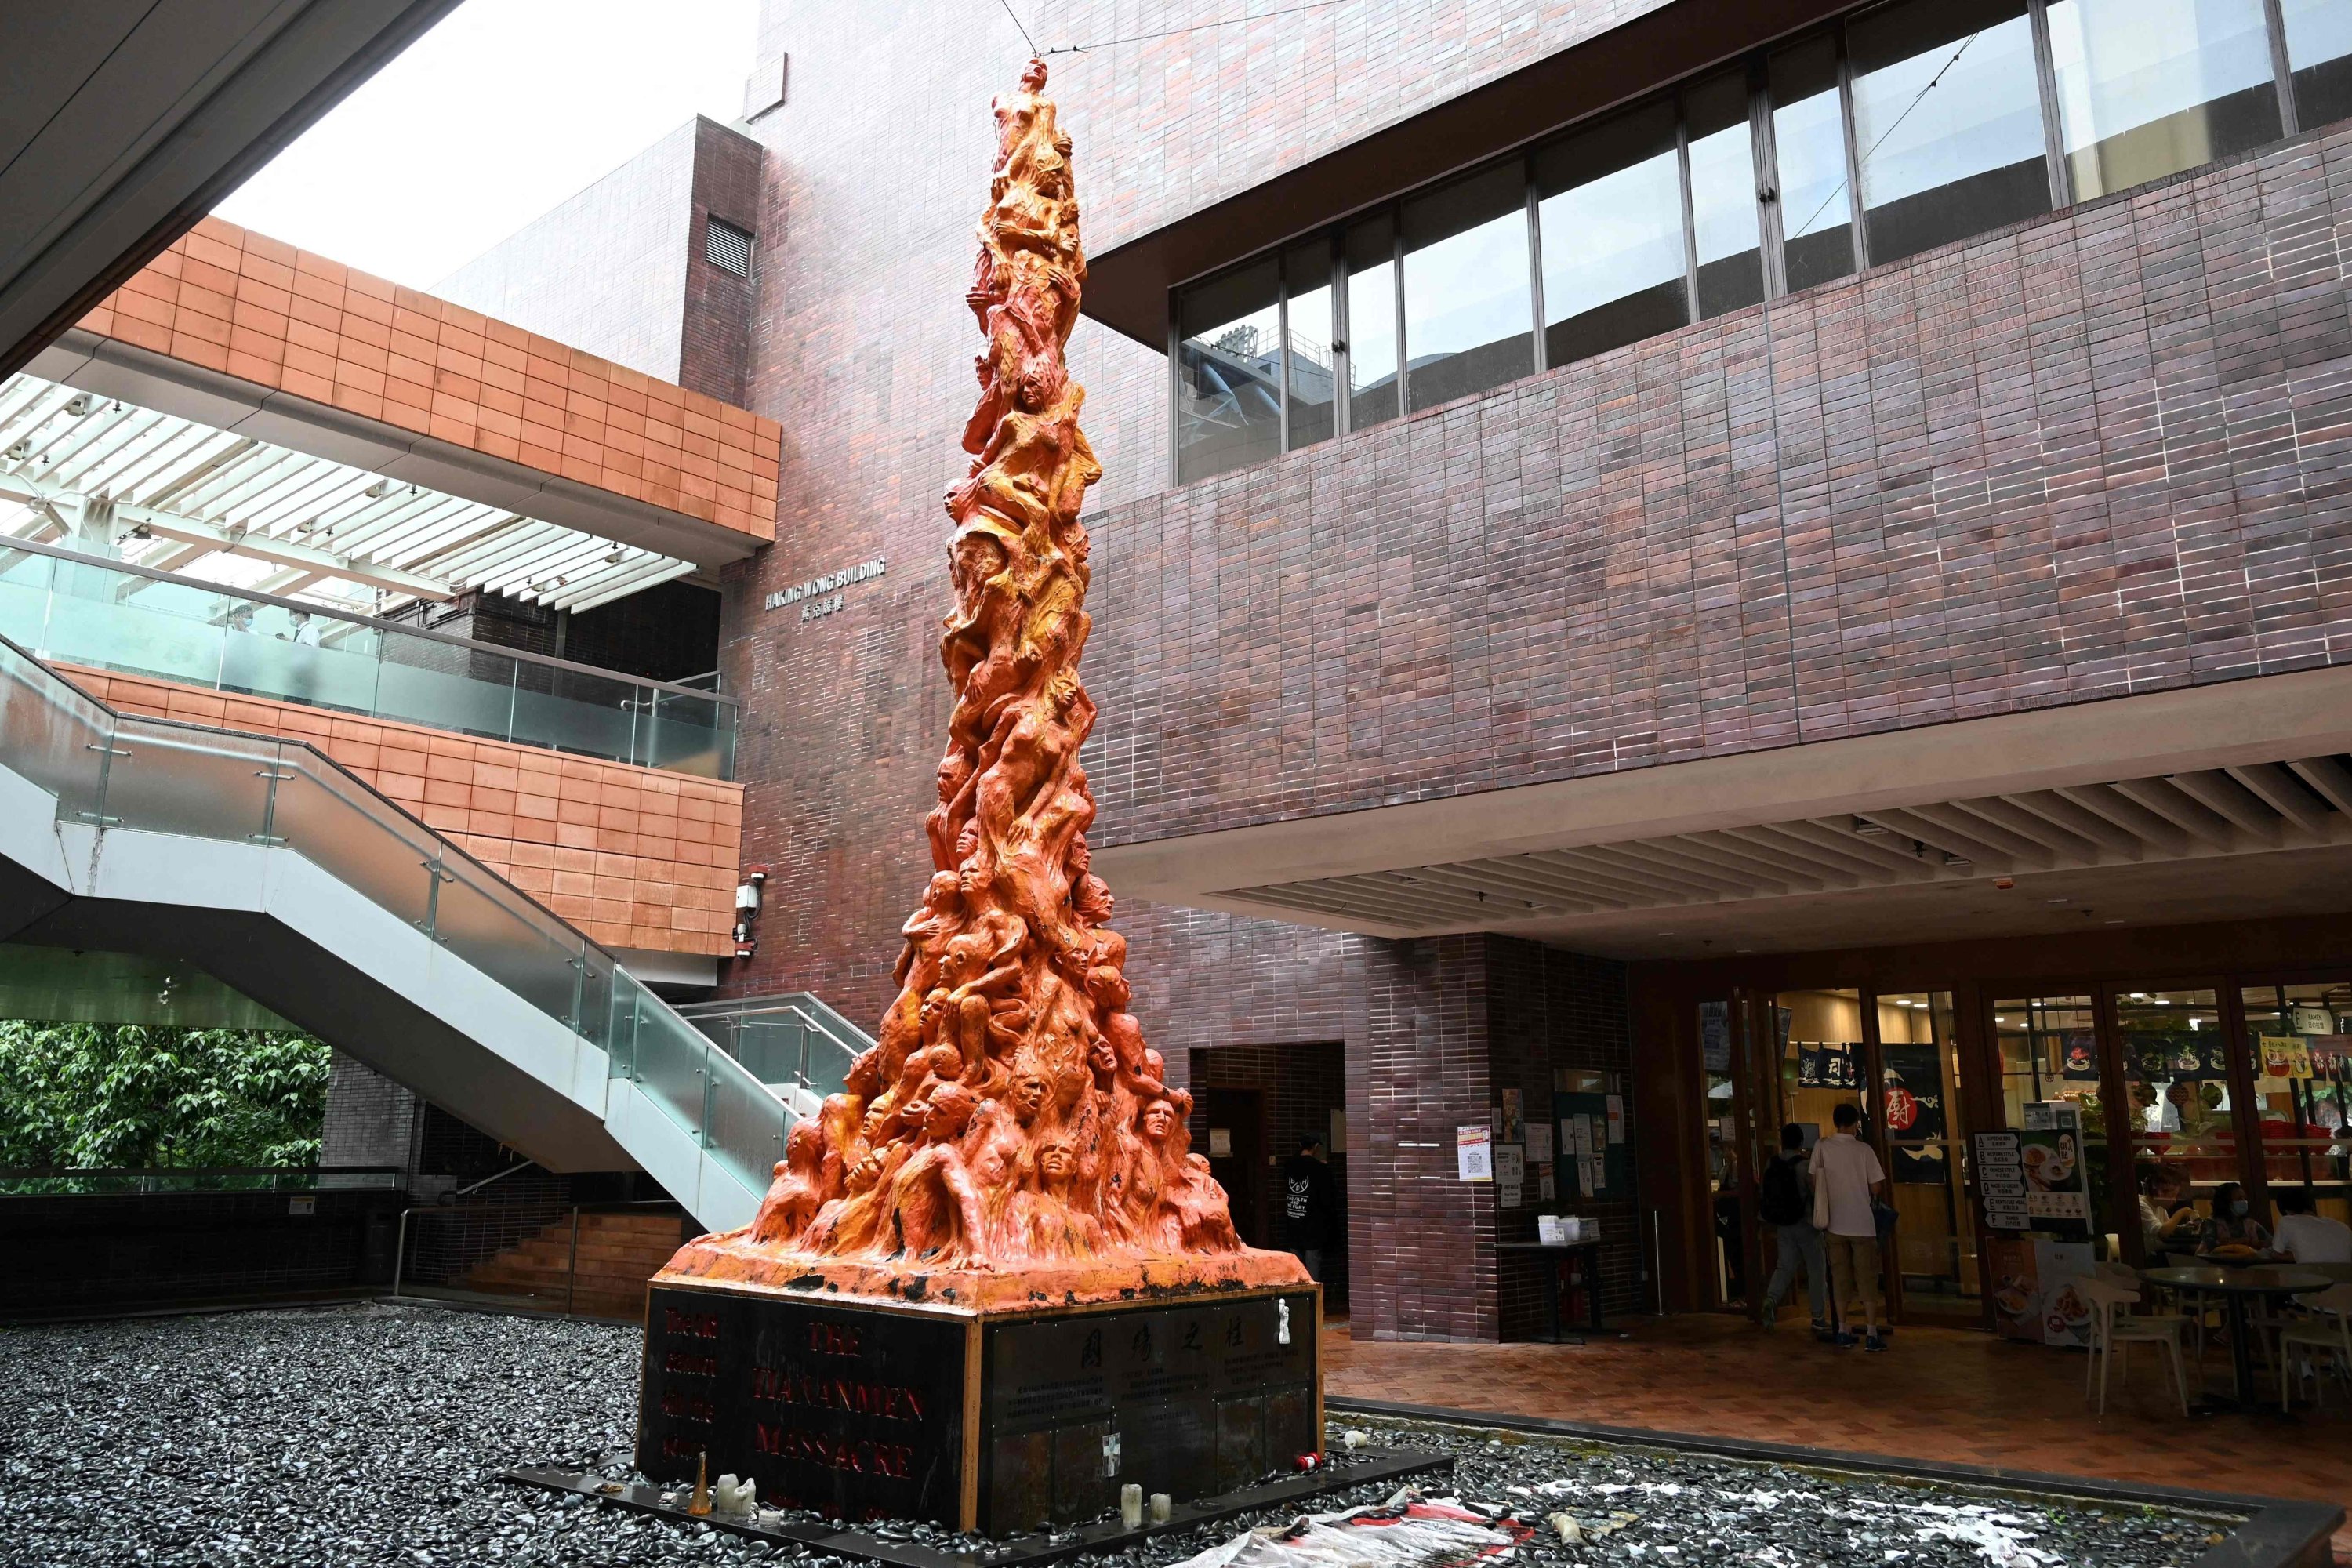 The 'Pillar of Shame', a statue that commemorates the victims of the 1989 Tiananmen Square crackdown in Beijing, at the University of Hong Kong (HKU) in Hong Kong, Oct. 10, 2021. (AFP Photo)